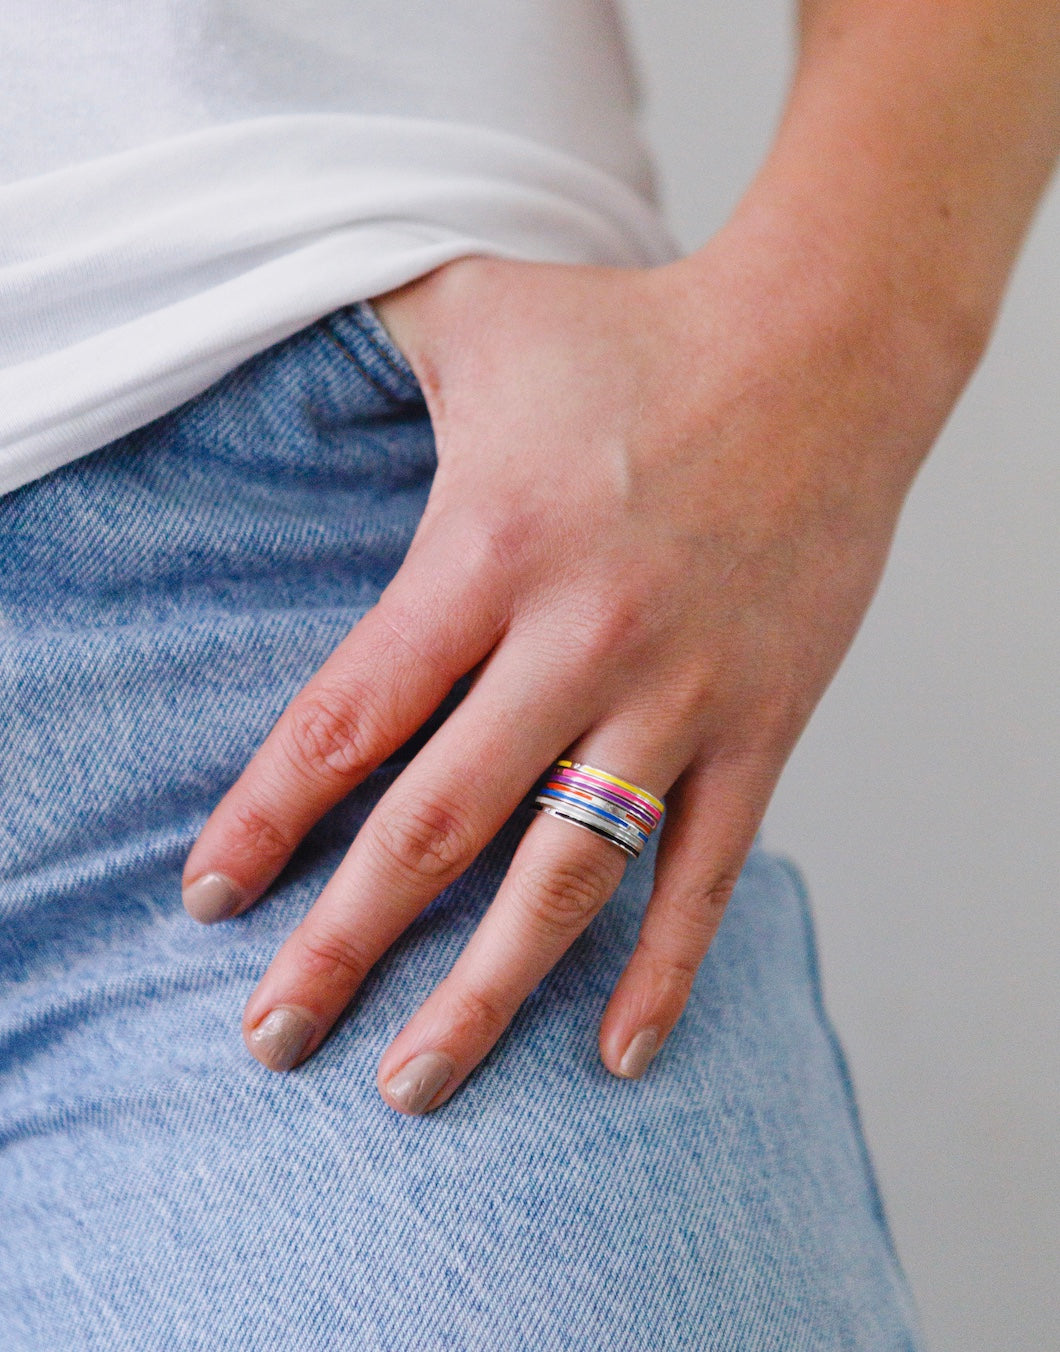 Rainbow Stacking Rings